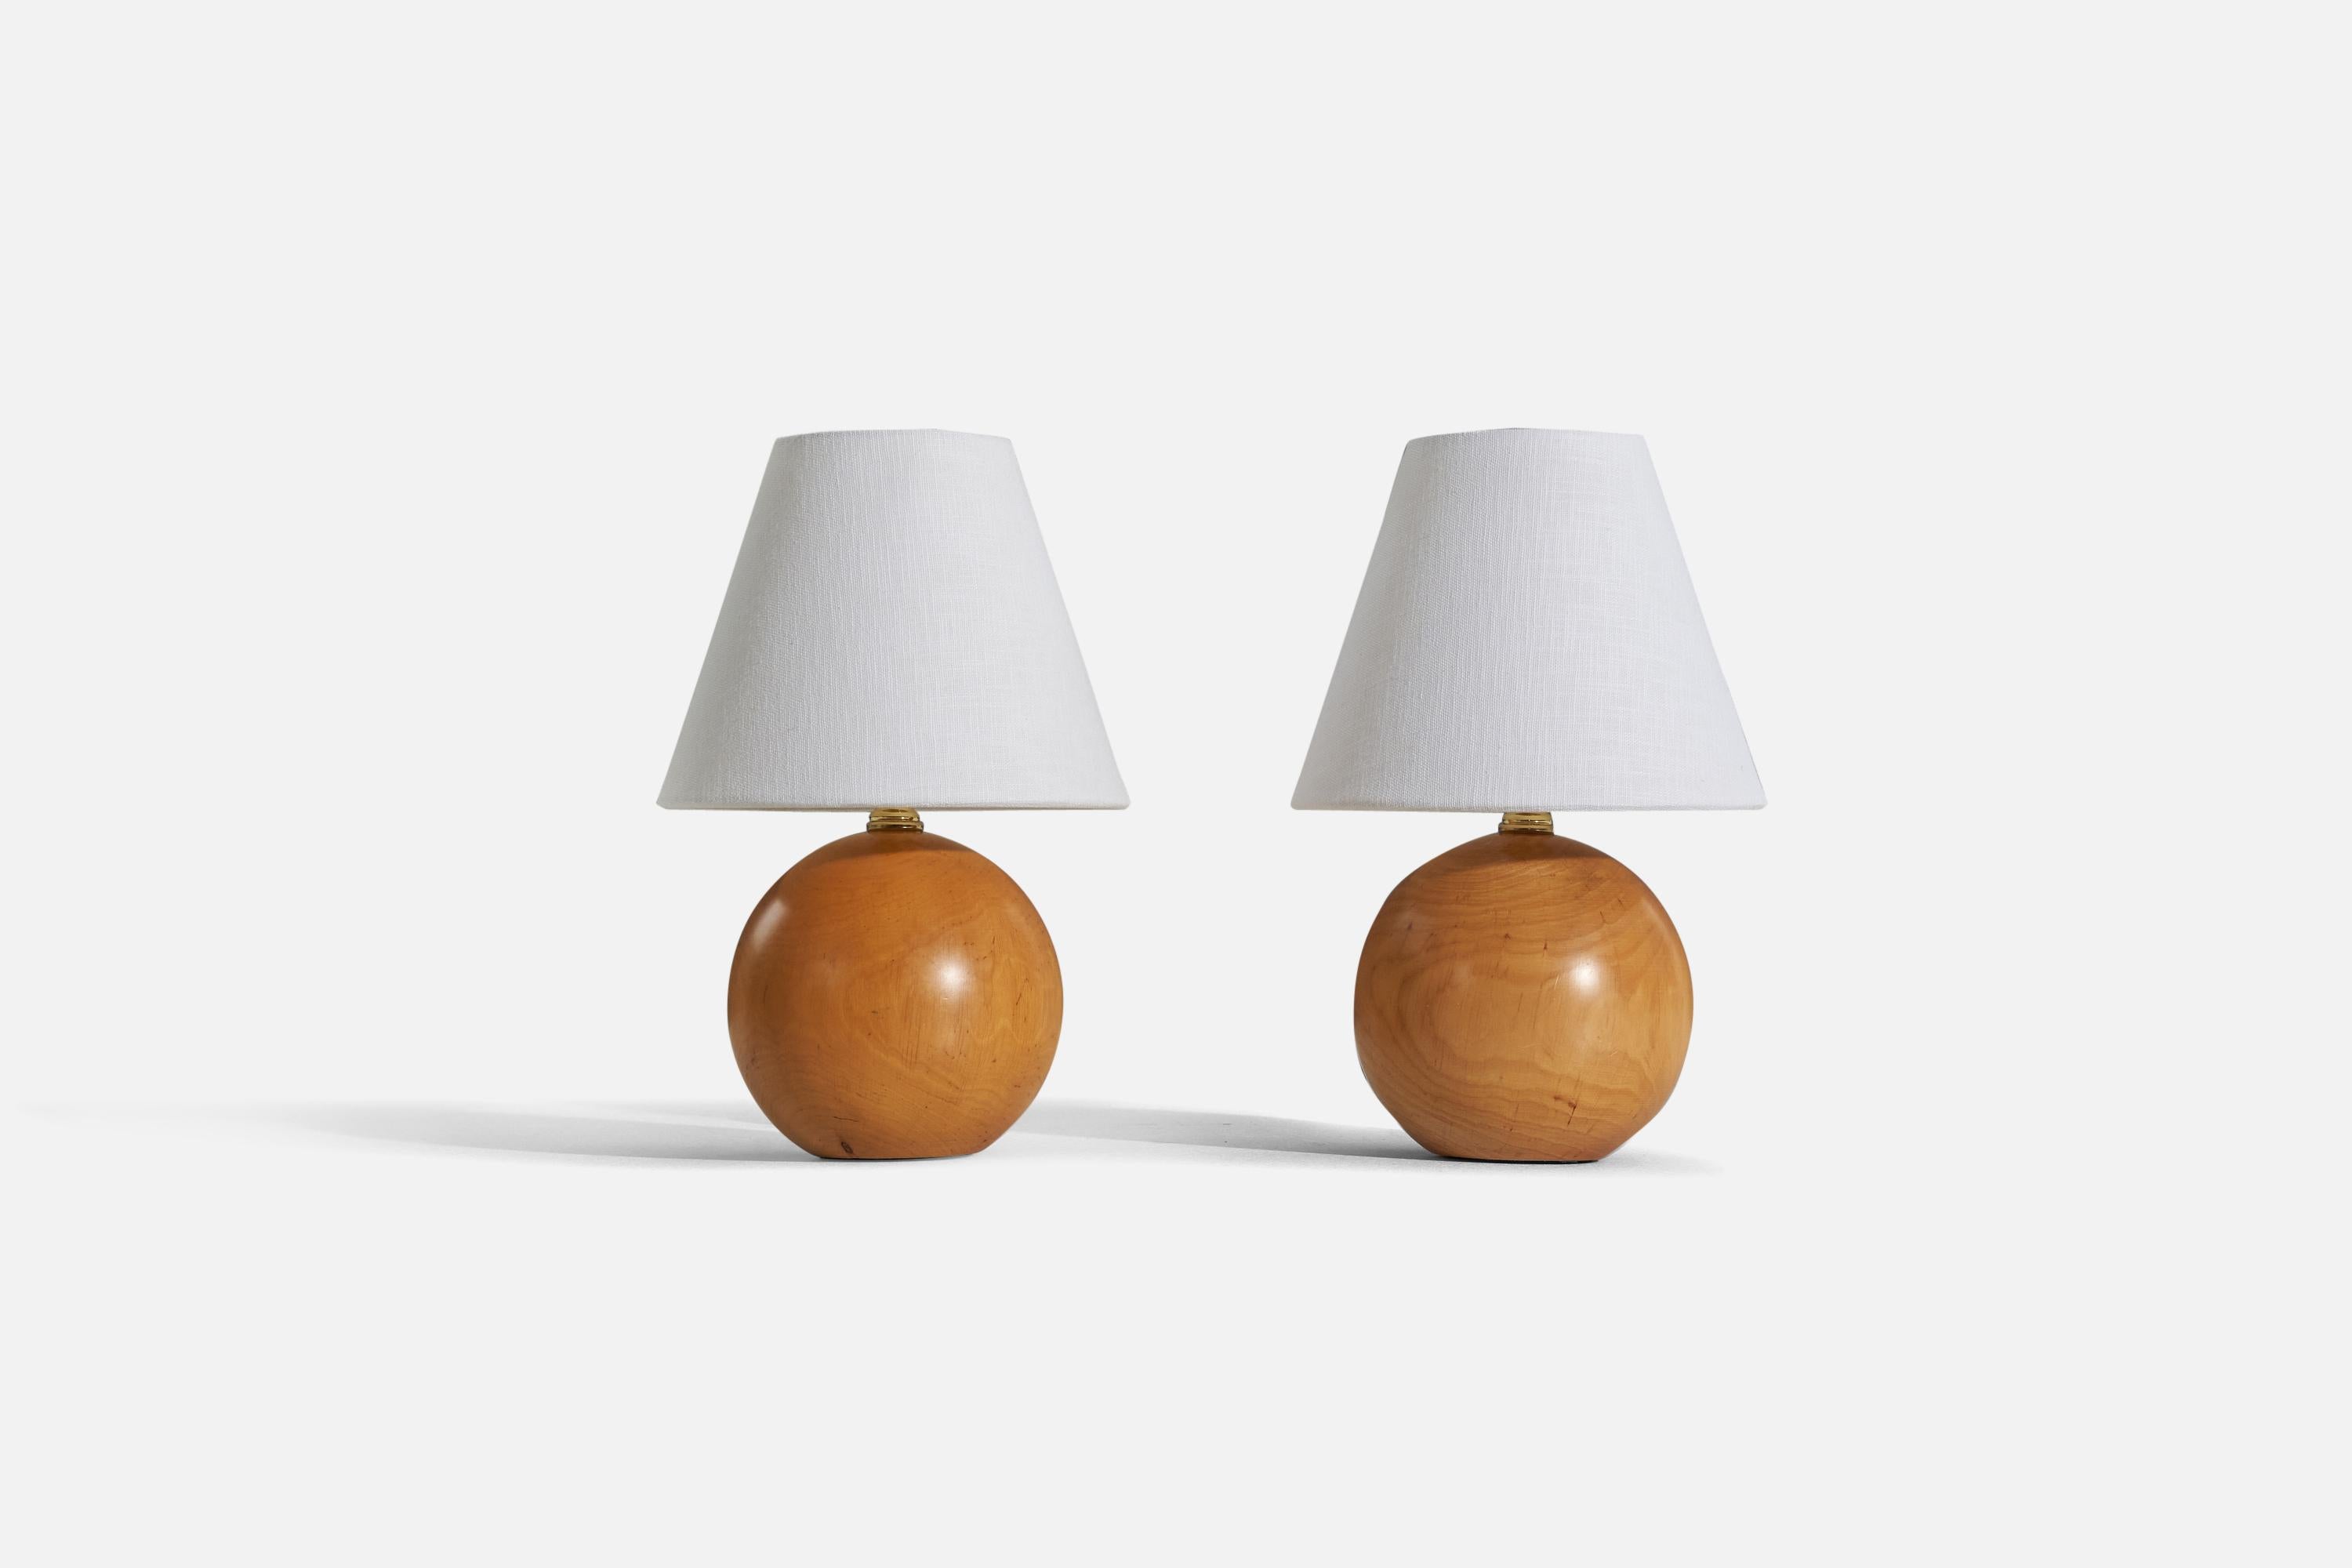 A pair of wooden table lamps designed and produced in the United States, 1960s.

Sold without lampshade. 
Dimensions of lamp (inches) : 8.3125 x 6.125 x 6.125 (H x W x D)
Dimensions of shade (inches) : 4 x 8 x 6.5 (T x B x H)
Dimension of lamp